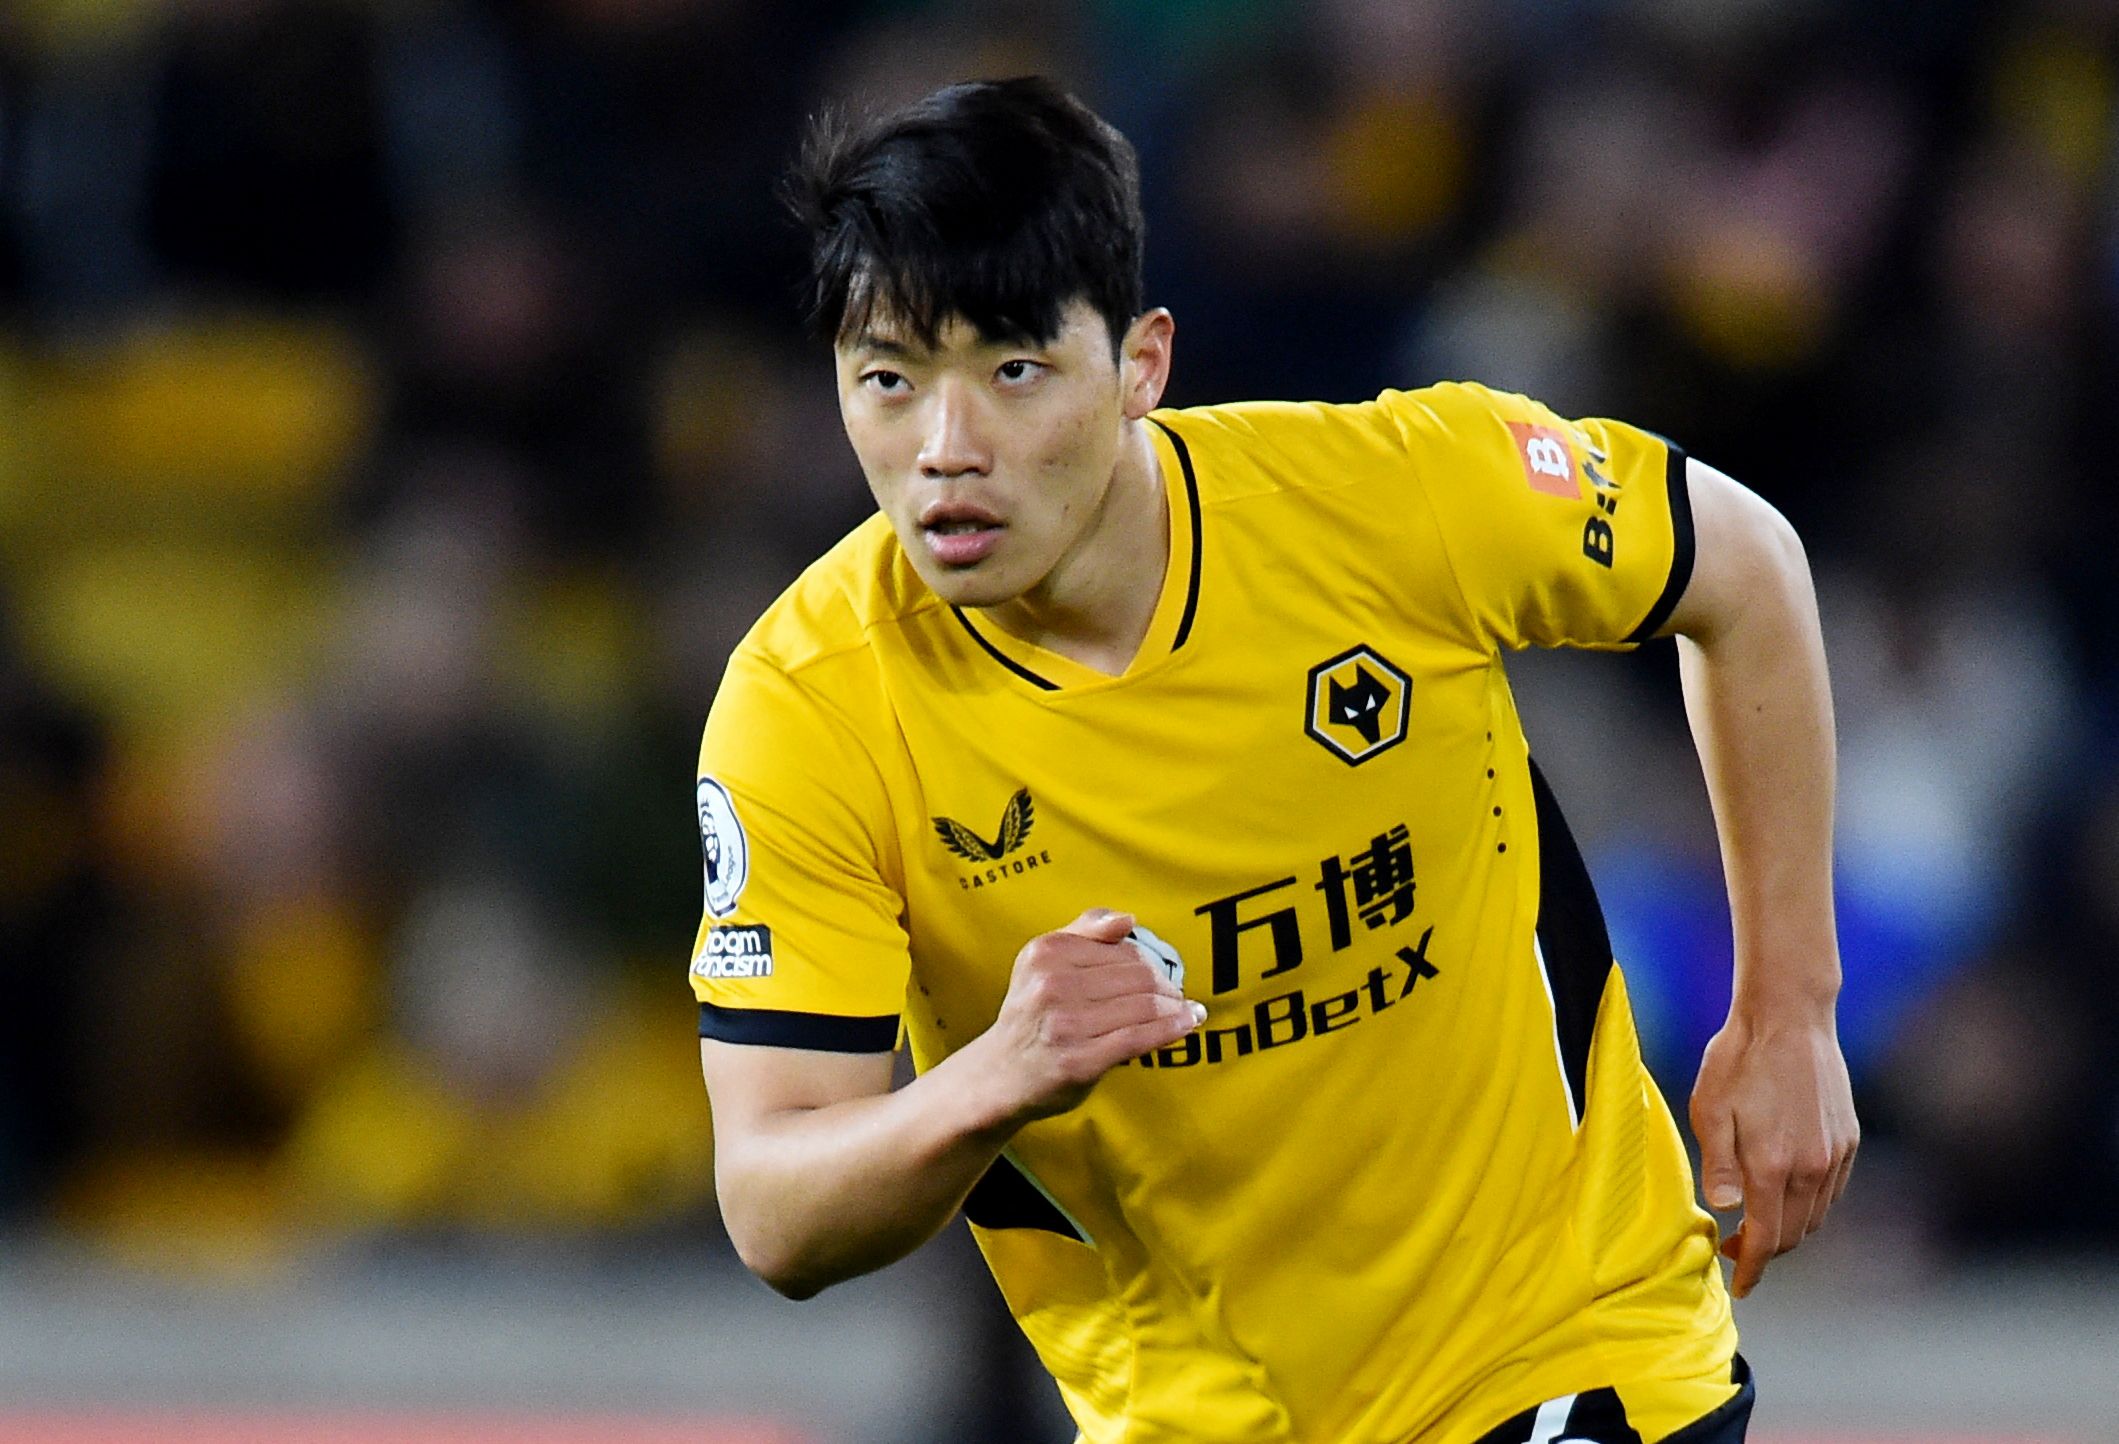 hee-chan-hwang-wolverhampton-wanderers-premier-league-wolves-transfer-news-bruno-lage-latest-ji-sung-park-manchester-united-sir-alex-fergusonSoccer Football - Premier League - Wolverhampton Wanderers v Manchester City - Molineux Stadium, Wolverhampton, Britain - May 11, 2022 Wolverhampton Wanderers' Hwang Hee-Chan REUTERS/Peter Powell EDITORIAL USE ONLY. No use with unauthorized audio, video, data, fixture lists, club/league logos or 'live' services. Online in-match use limited to 75 images, no 